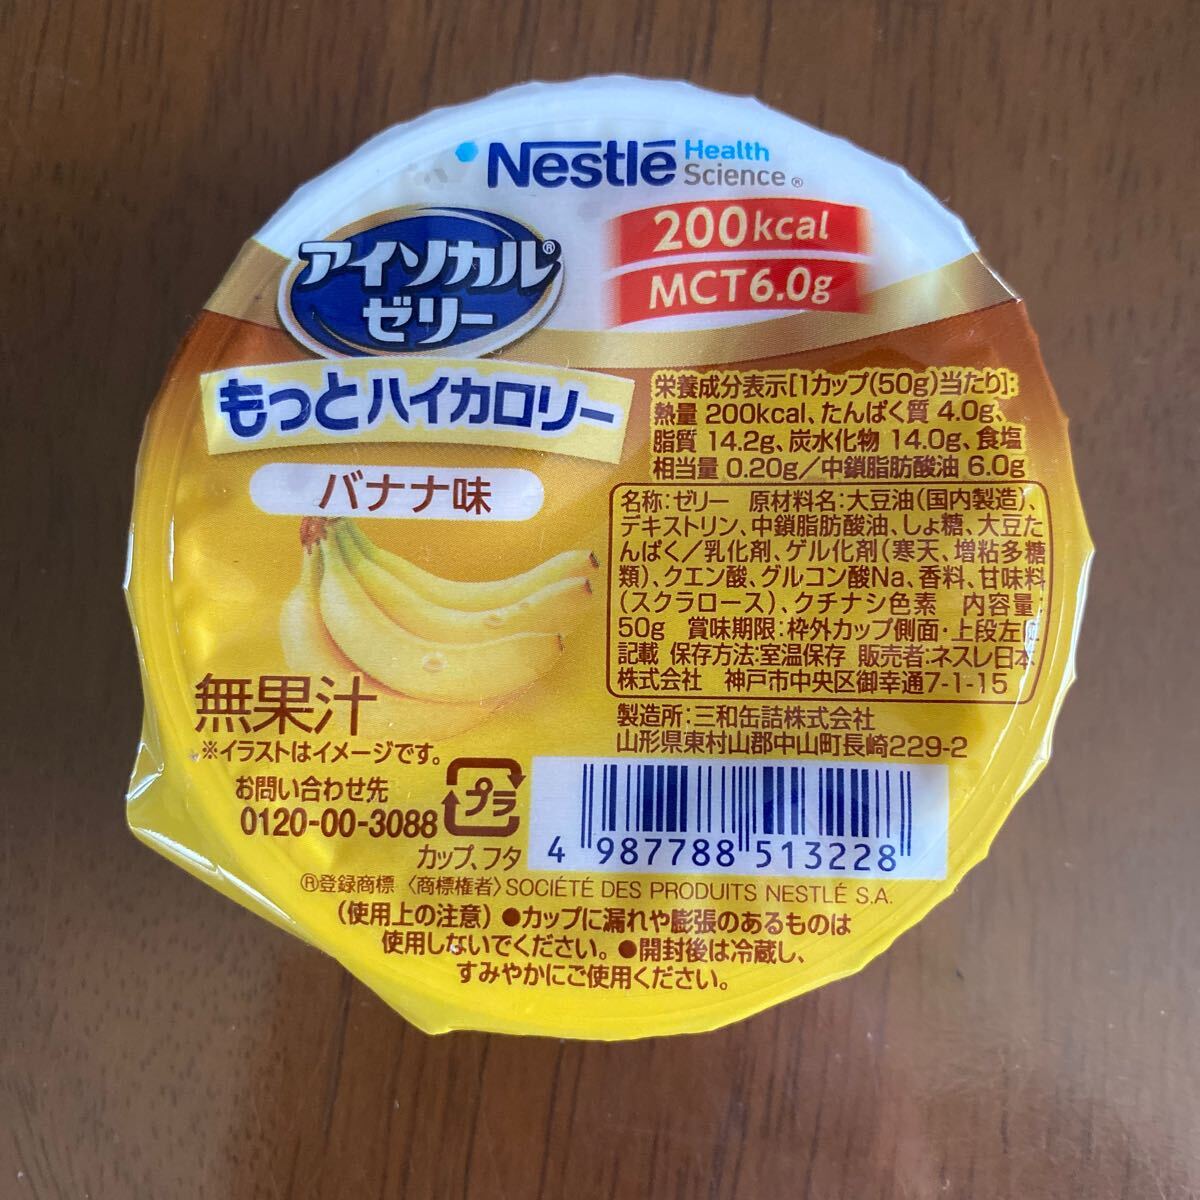  super-discount! Nestle Japan I sokaru jelly 18 piece variety - set! nutrition assistance food best-before date 5|11 high calorie nursing meal easy nutrition ..! high quality 